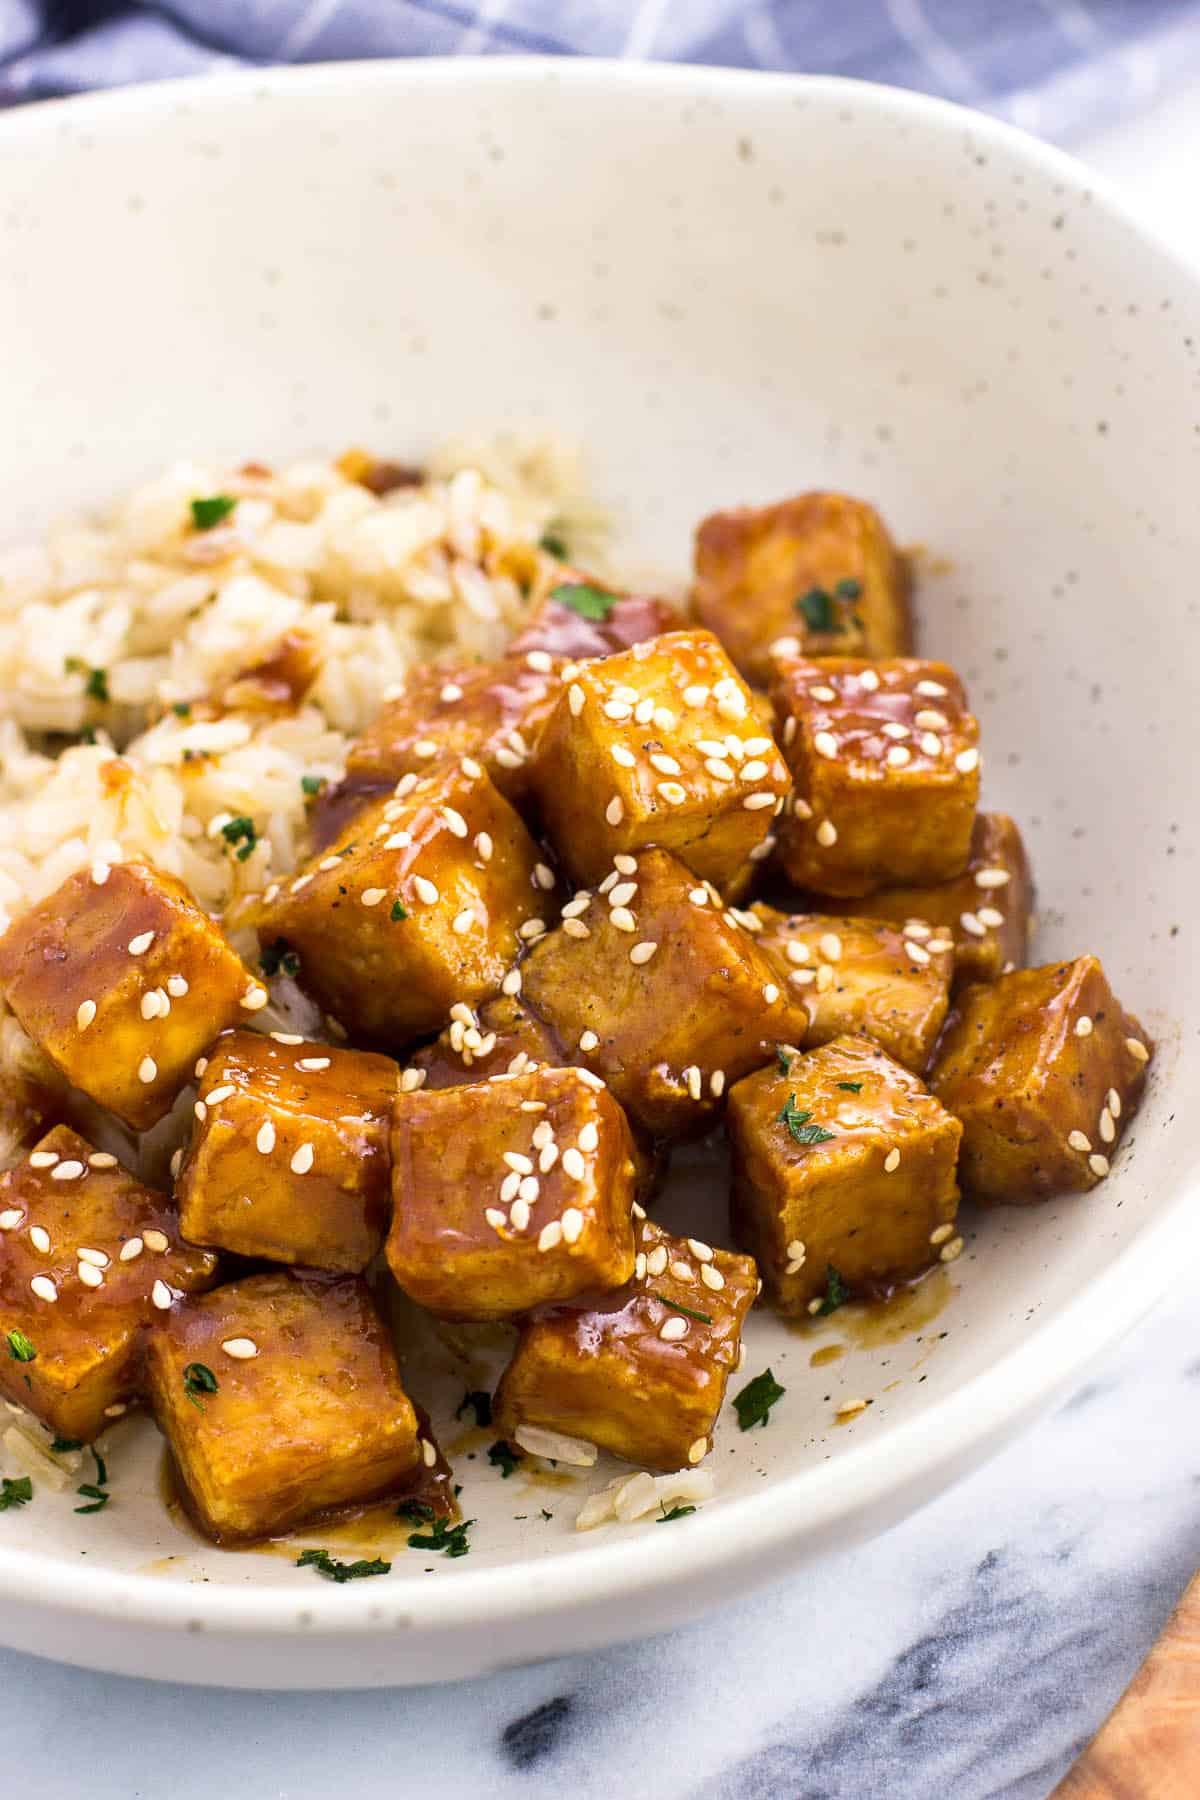 Cubes of tofu tossed in glaze and topped with sesame seeds in a bowl with brown rice.